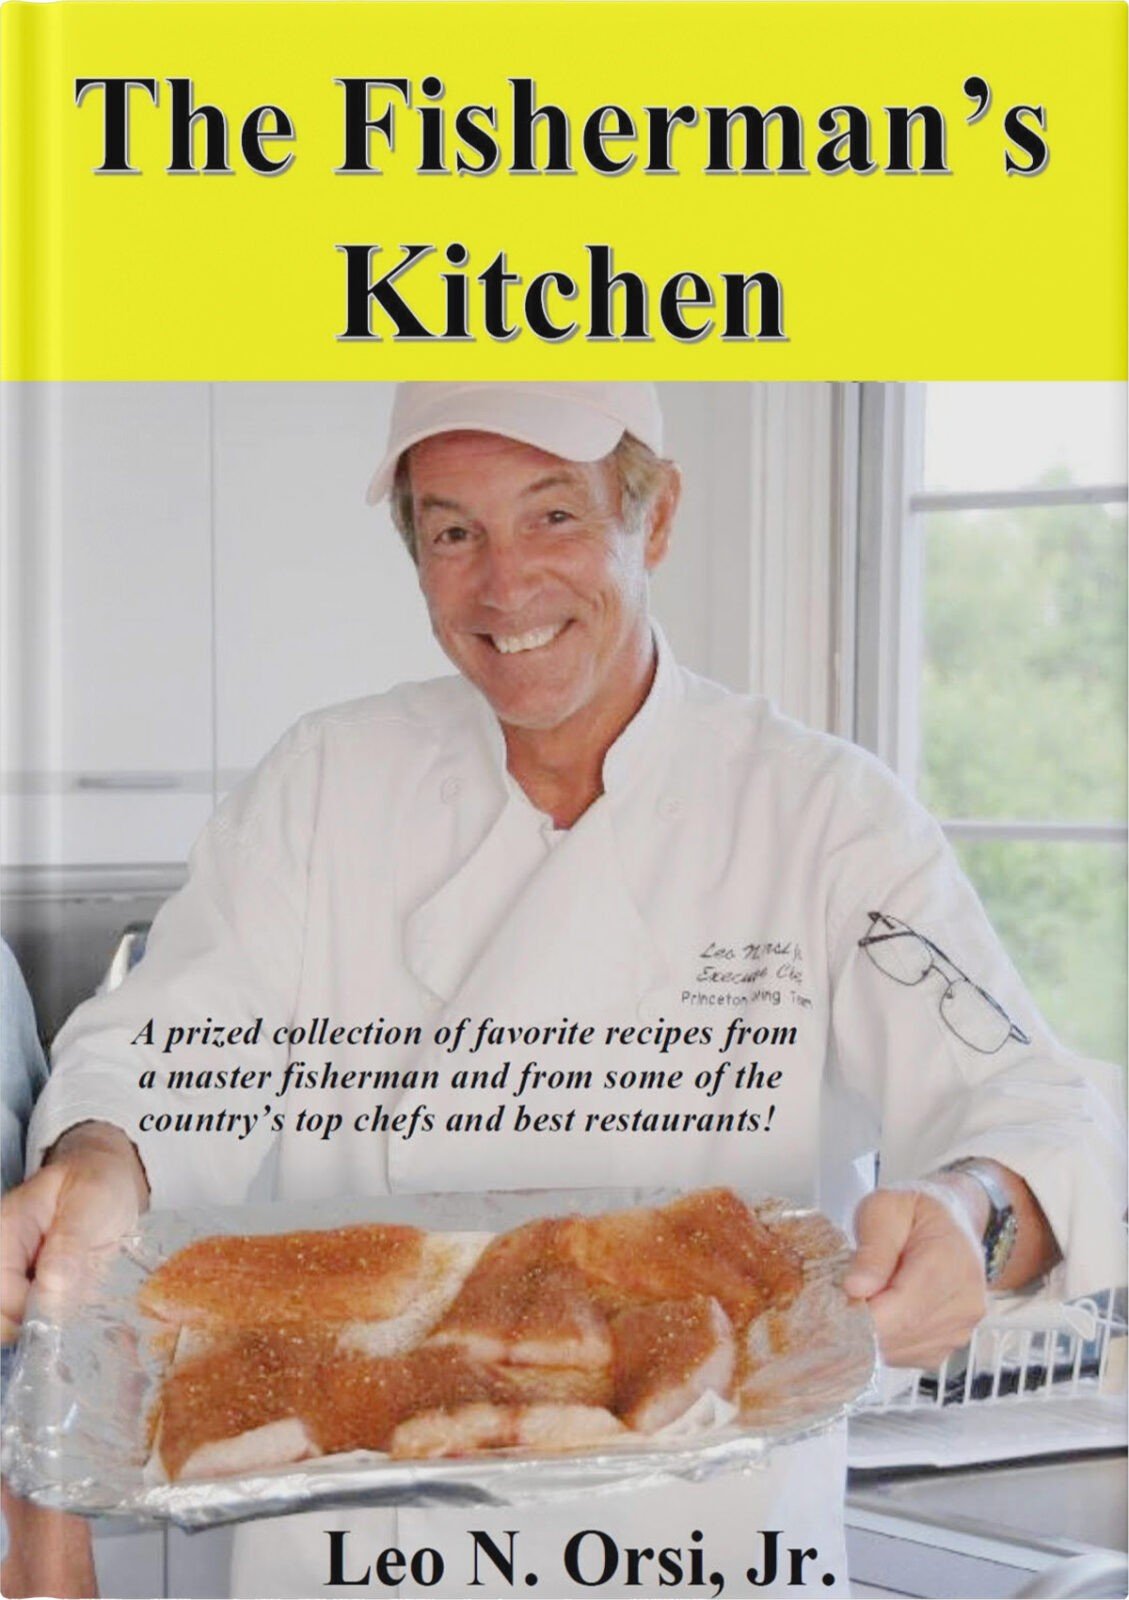 The Fisherman's Kitchen - Book Cover